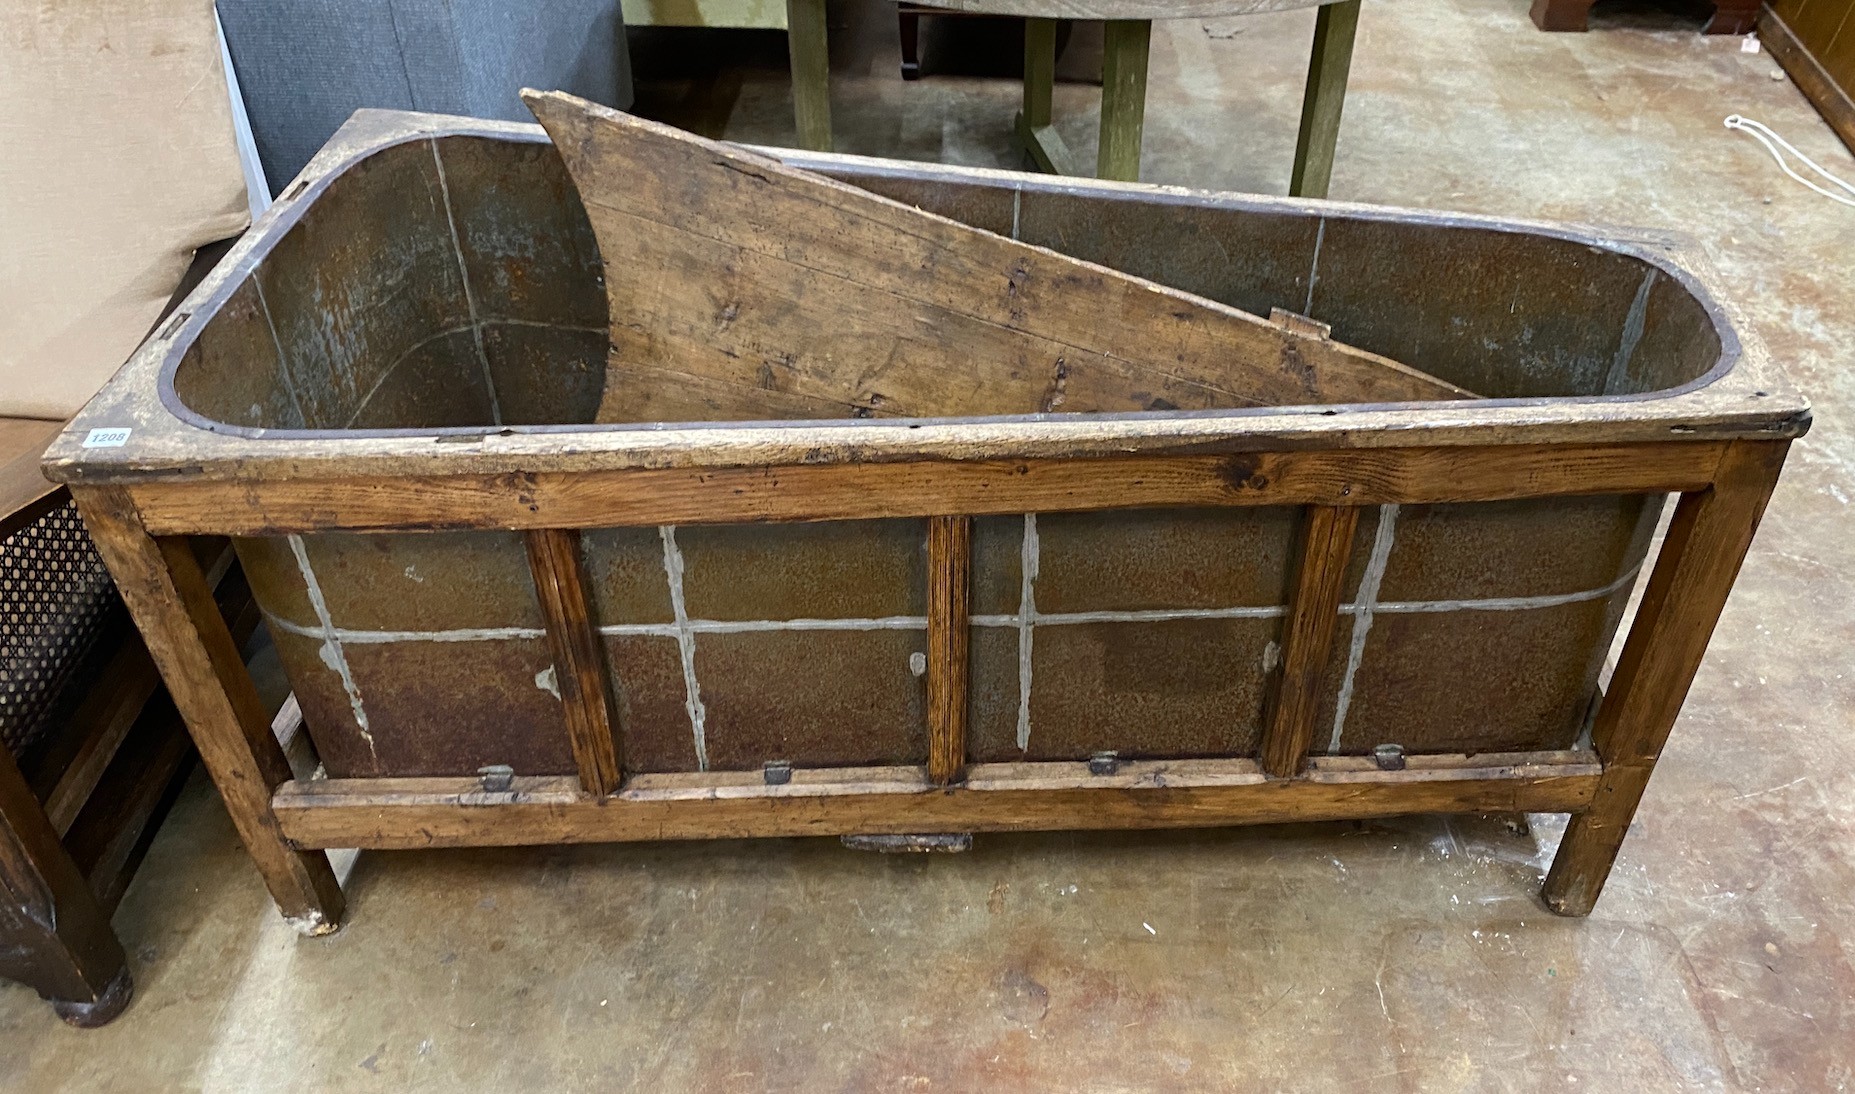 A 19th century French oak bath with zinc liner and cover, length 142cm, depth 65cm, height 64cm *Please note the sale commences at 9am.